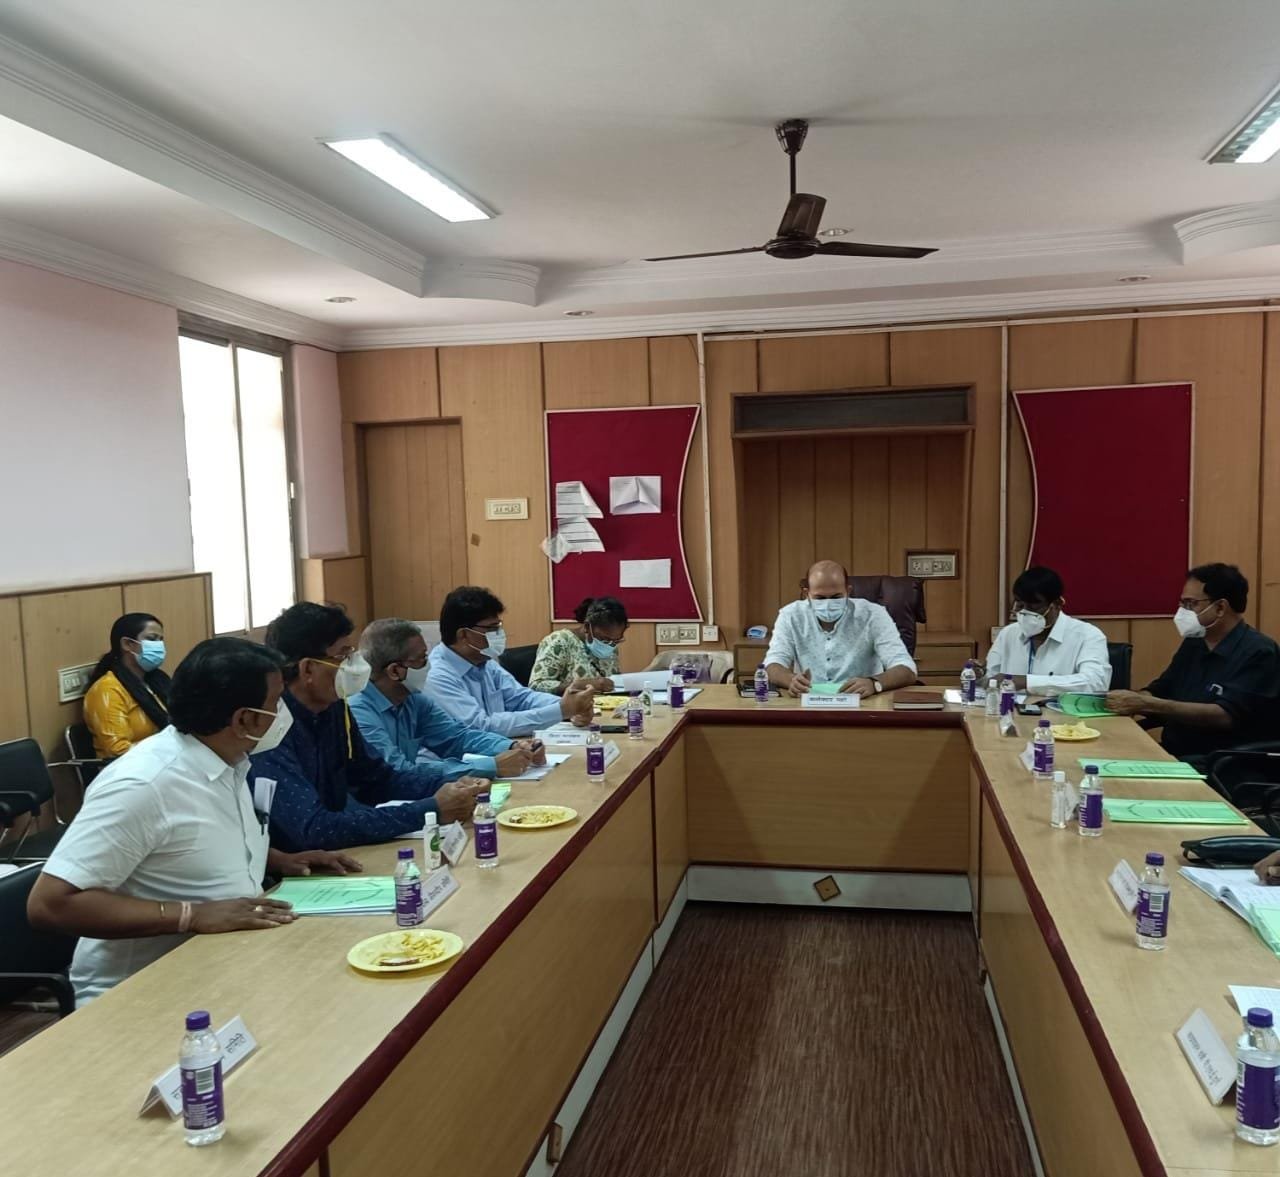 In the meeting of Jeevandeep Committee, Collector Dr. Sarveshwar Narendra Bhure